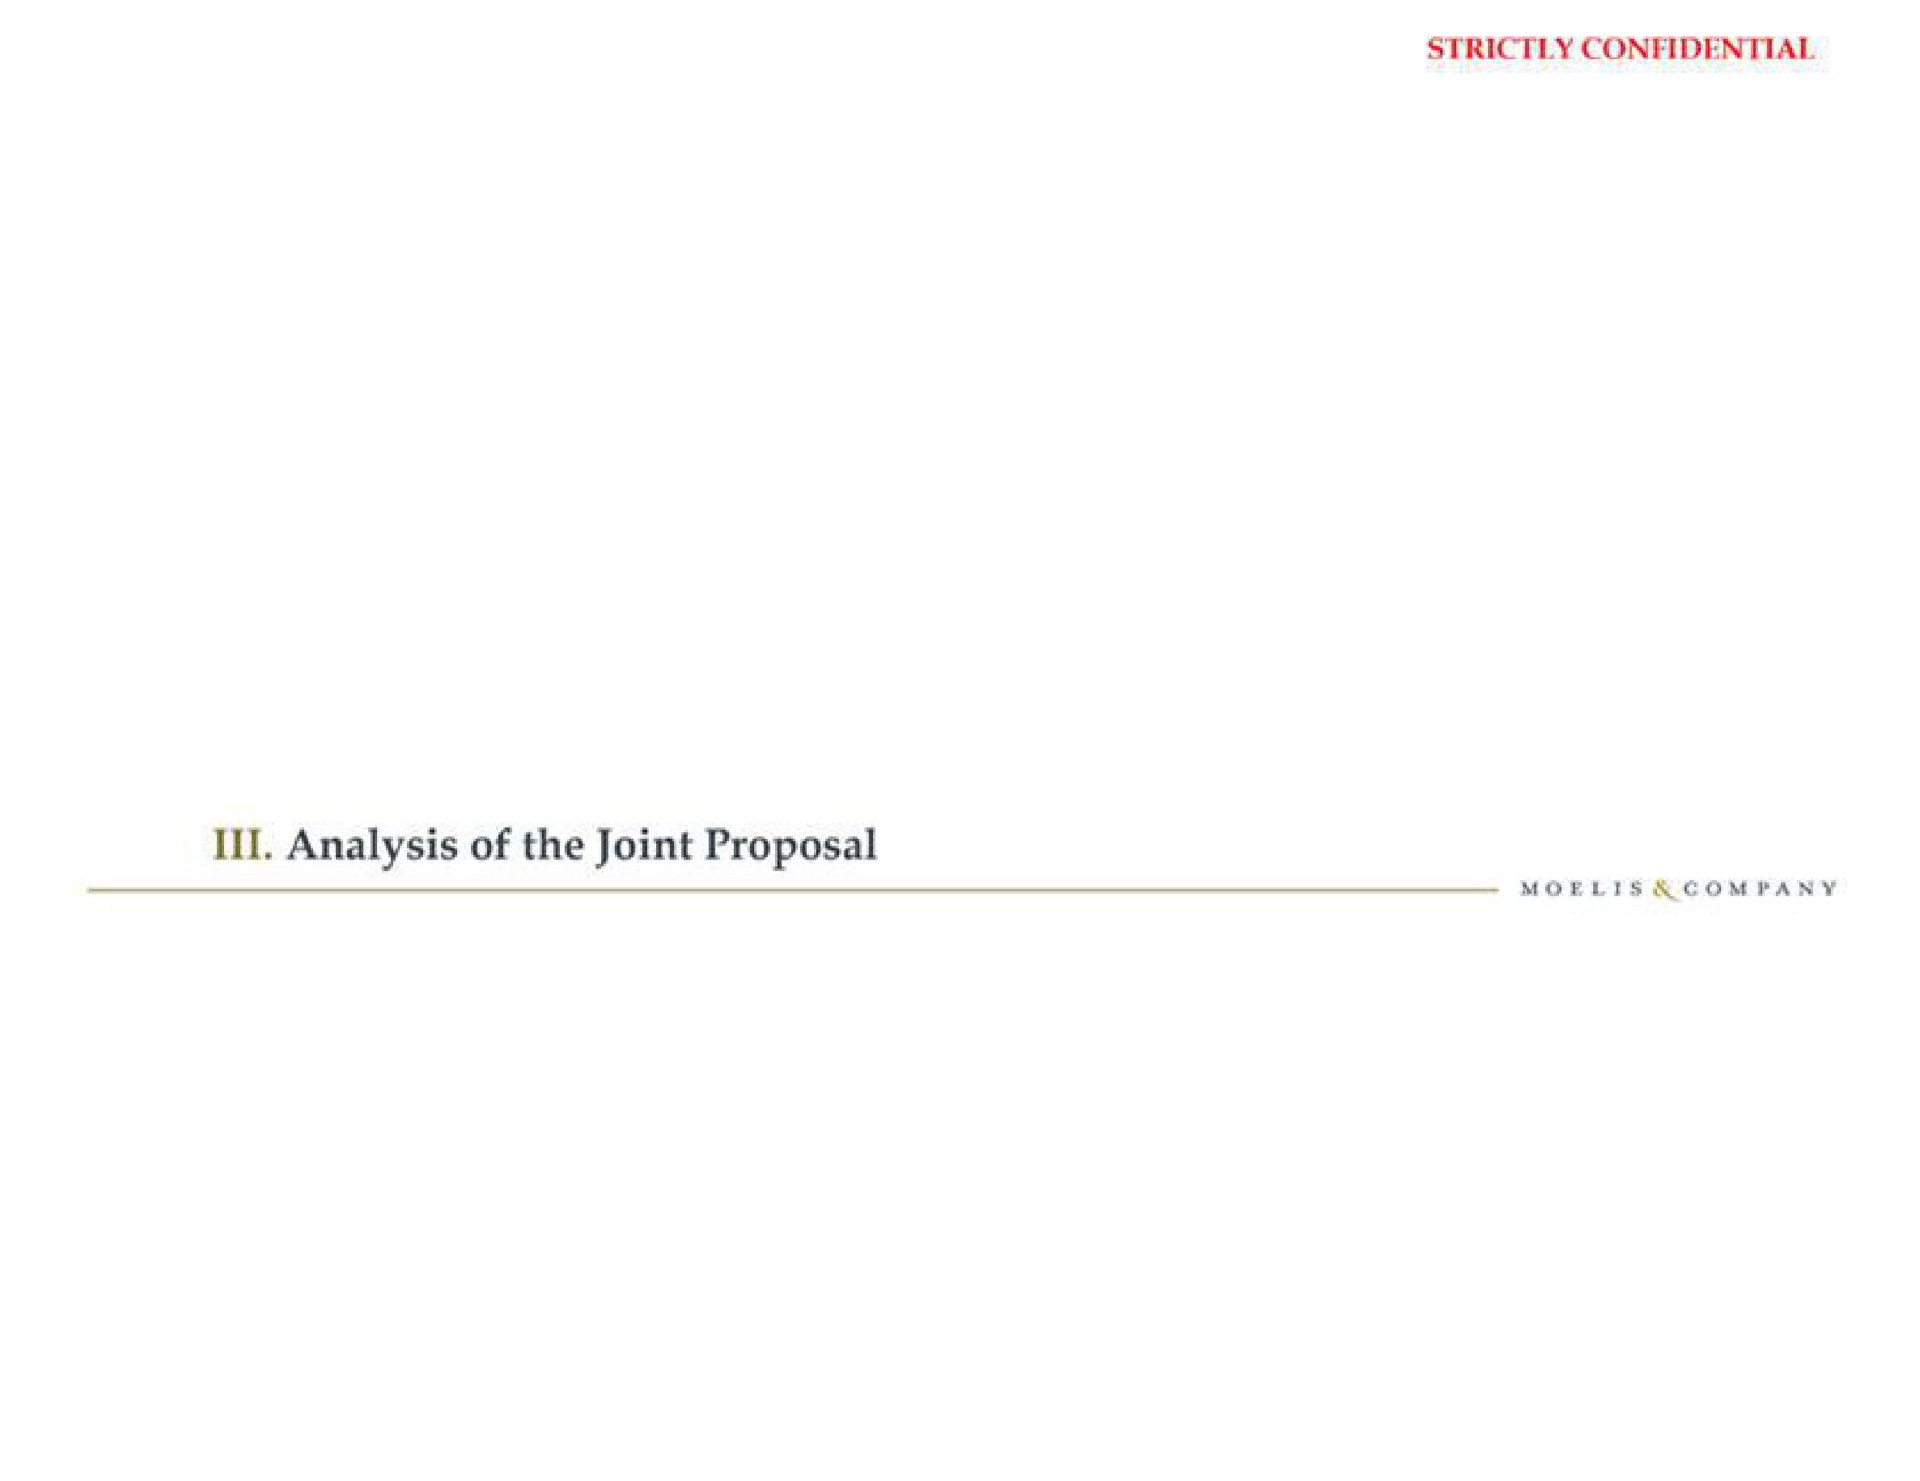 analysis of the joint proposal | Moelis & Company